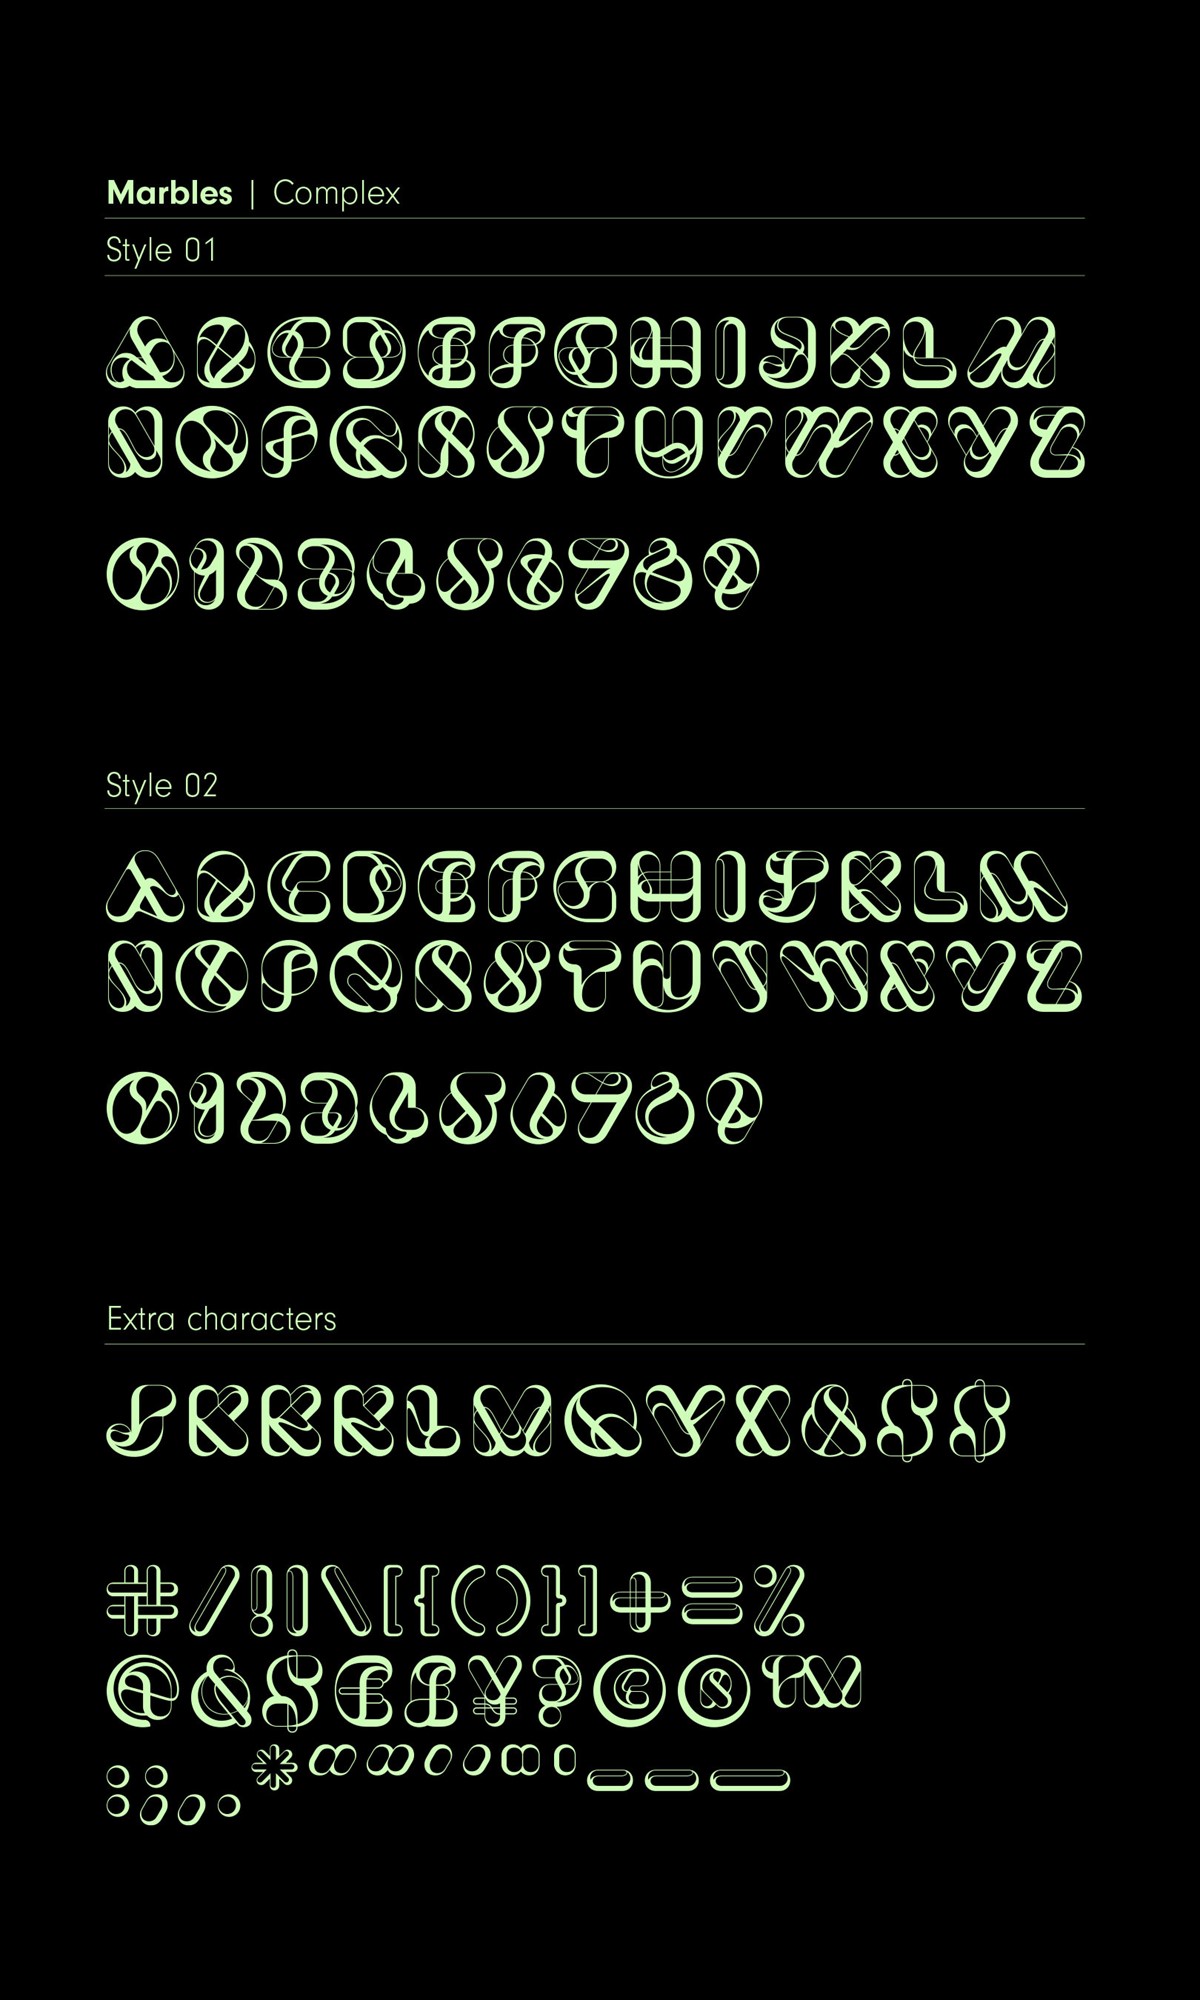 Marbles – An experimental typeface collaboration. Designed by Superfried. Built by F37. Marbles – complex glyphs.